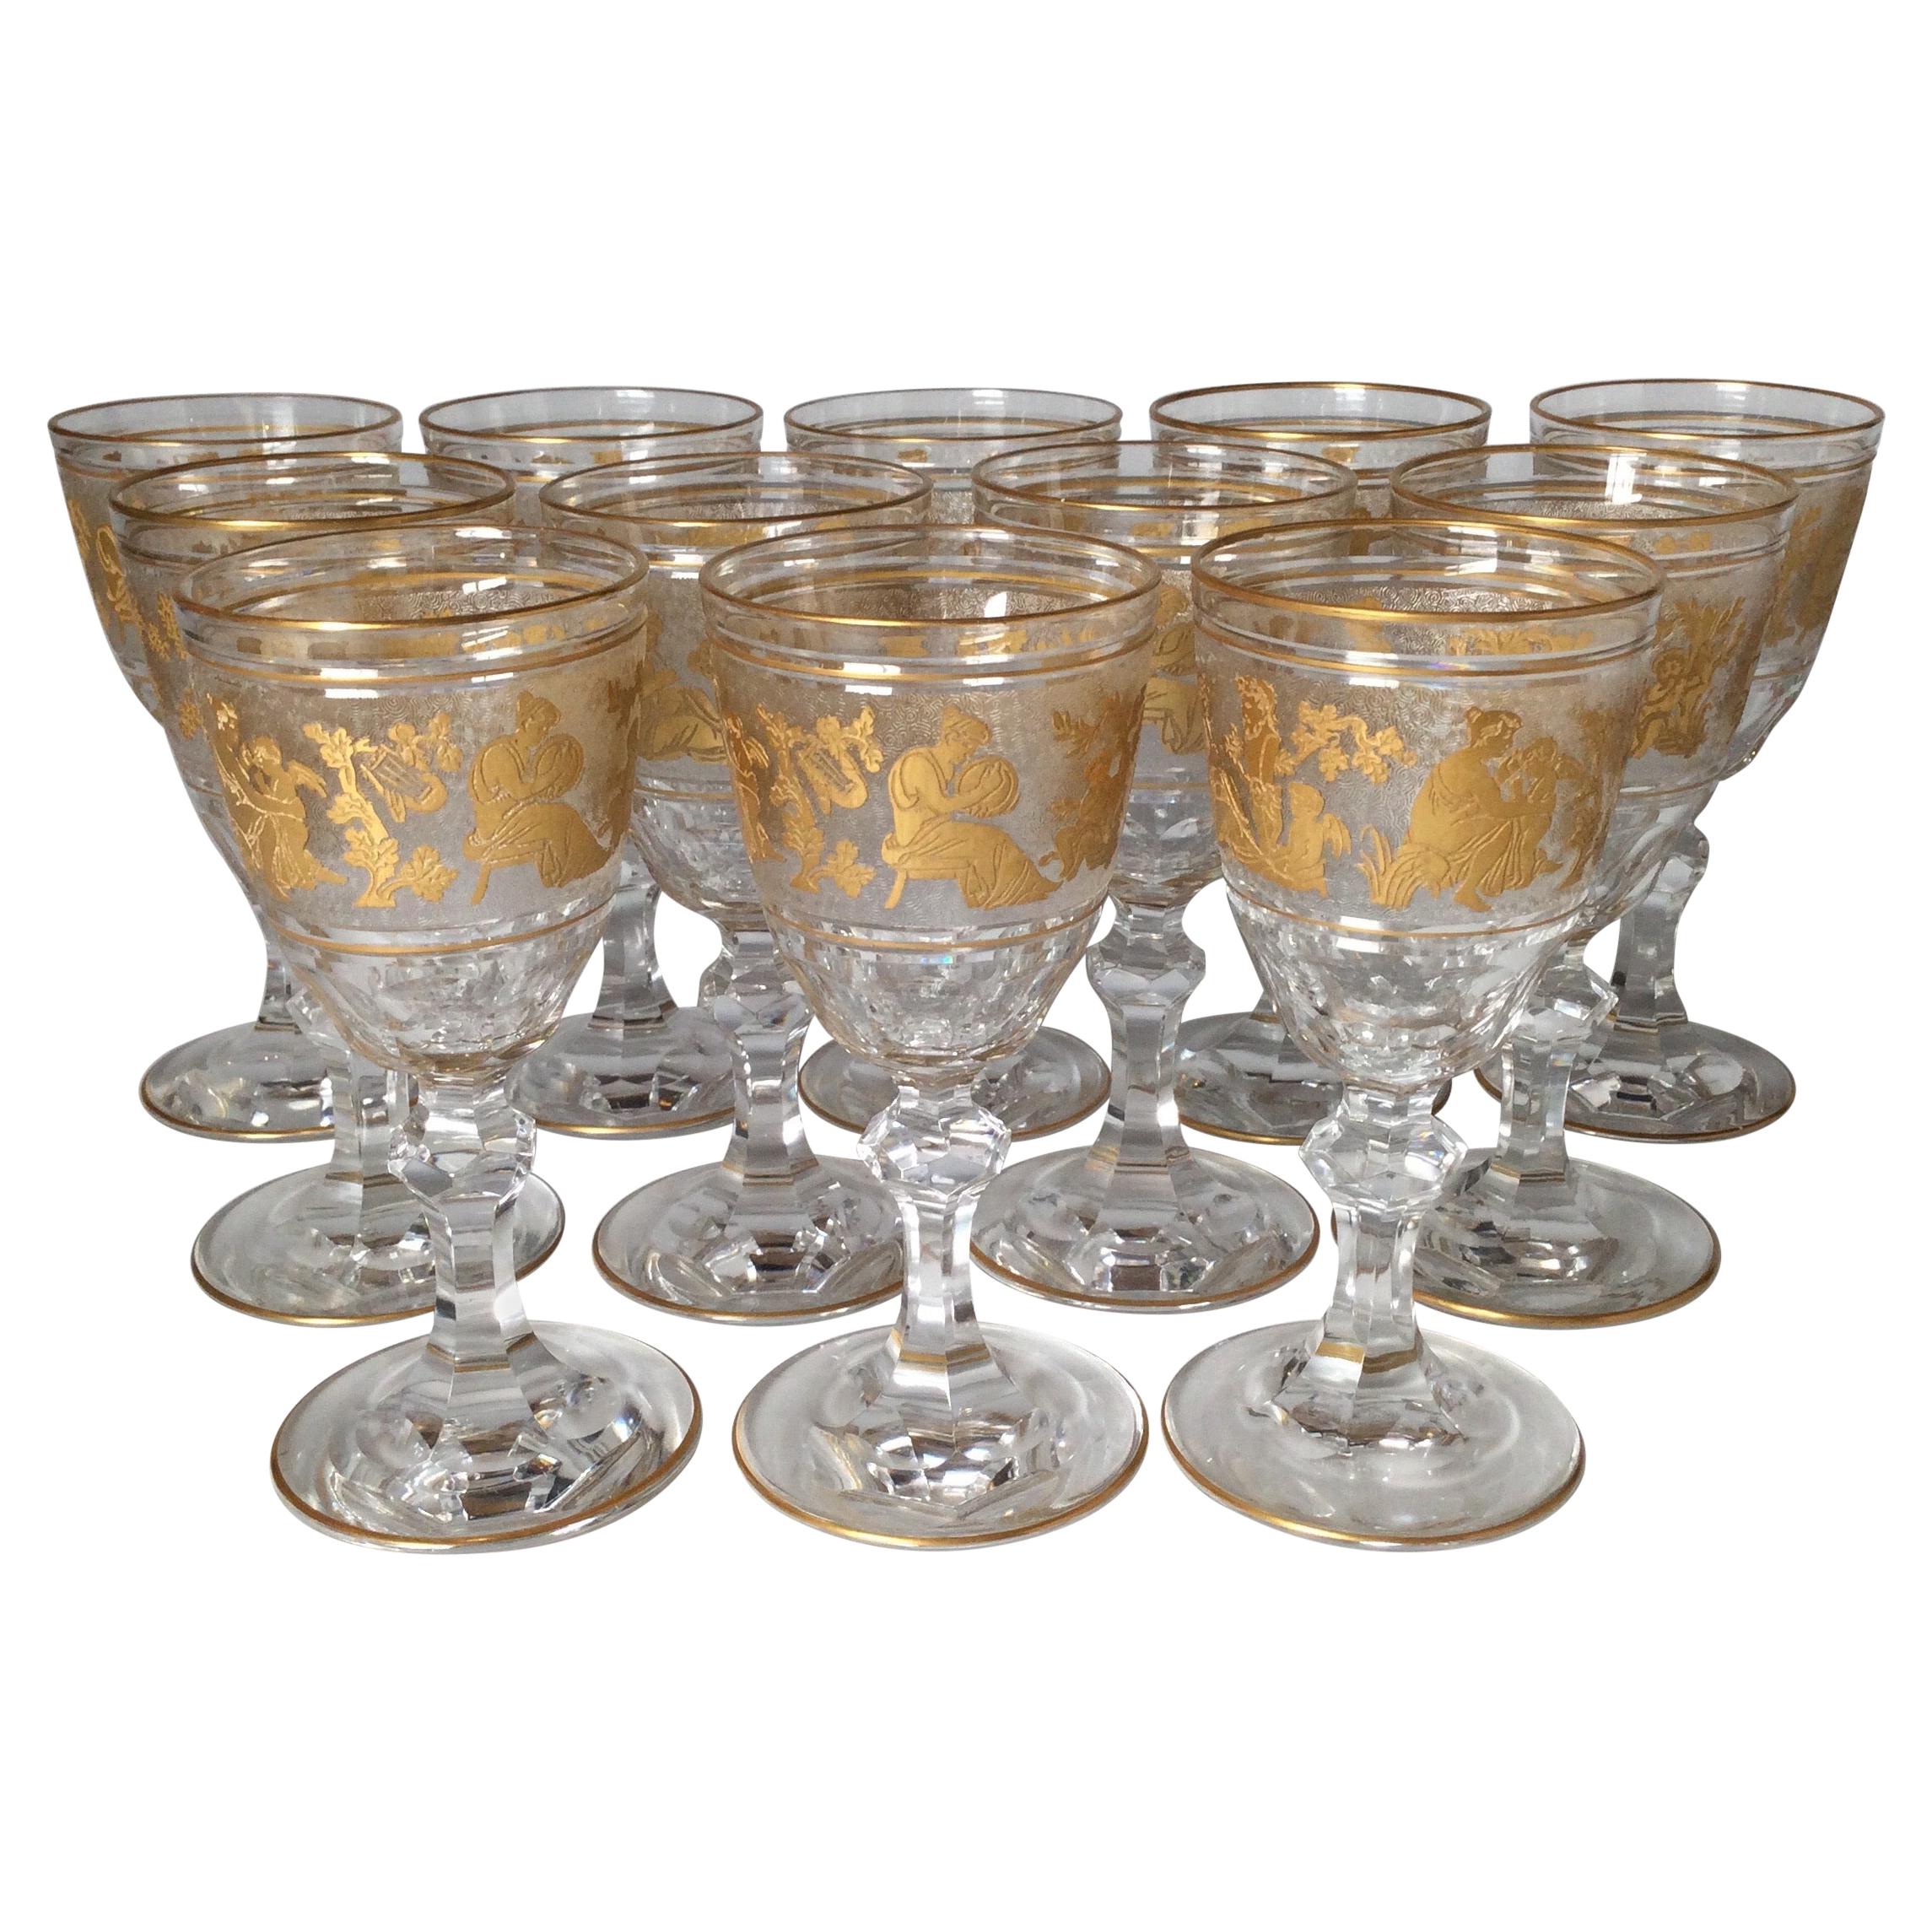 Set of 12 Val St. Lambert Acid Etched and Gilt Short Wine or Port Stems